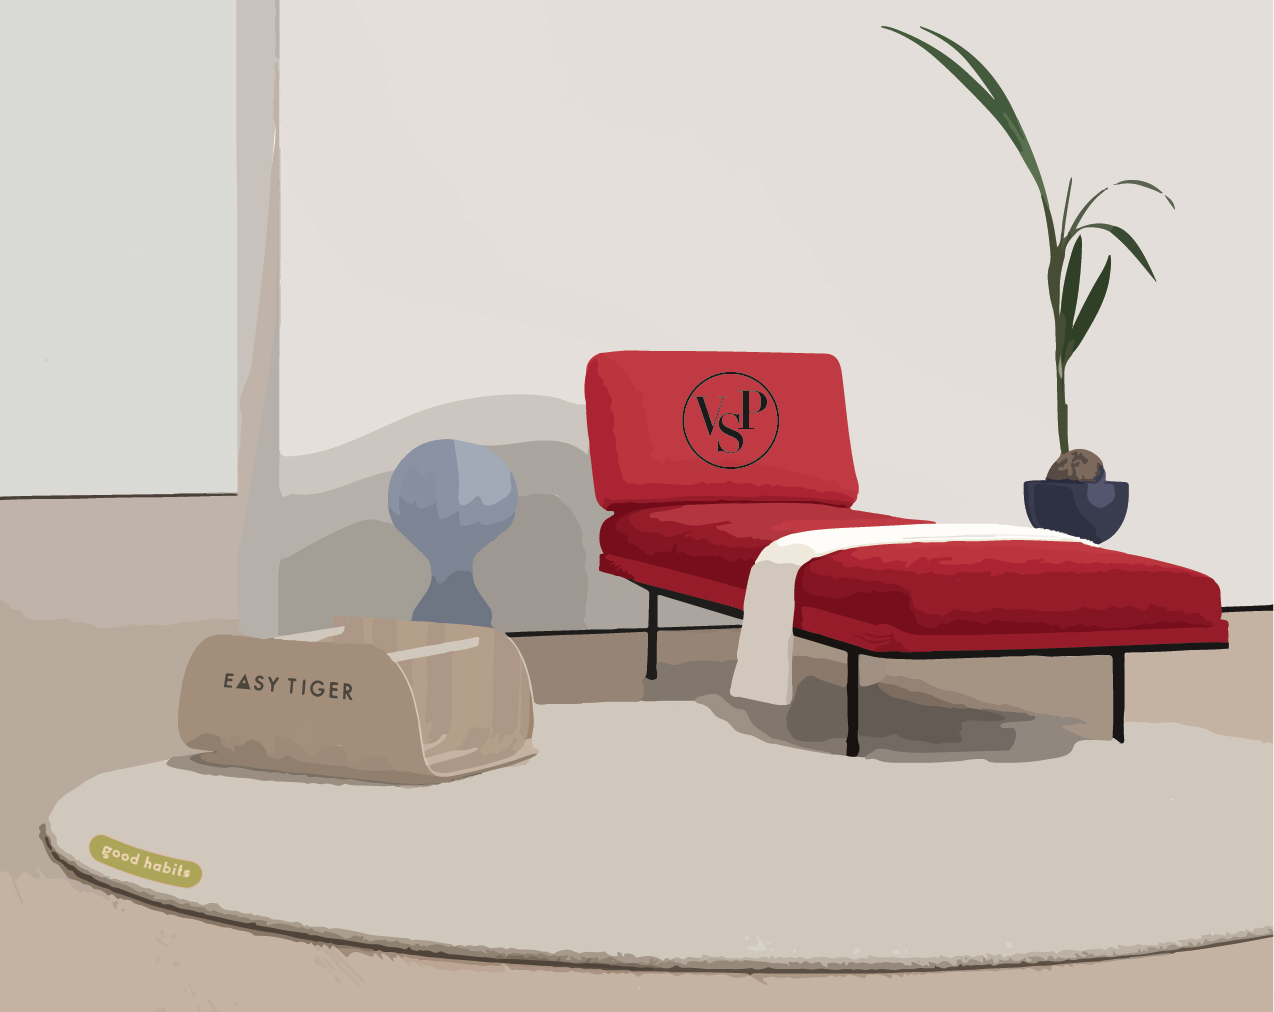 Illustration of a home minimalist space, featuring a red seat, round white rug and a potted plant.